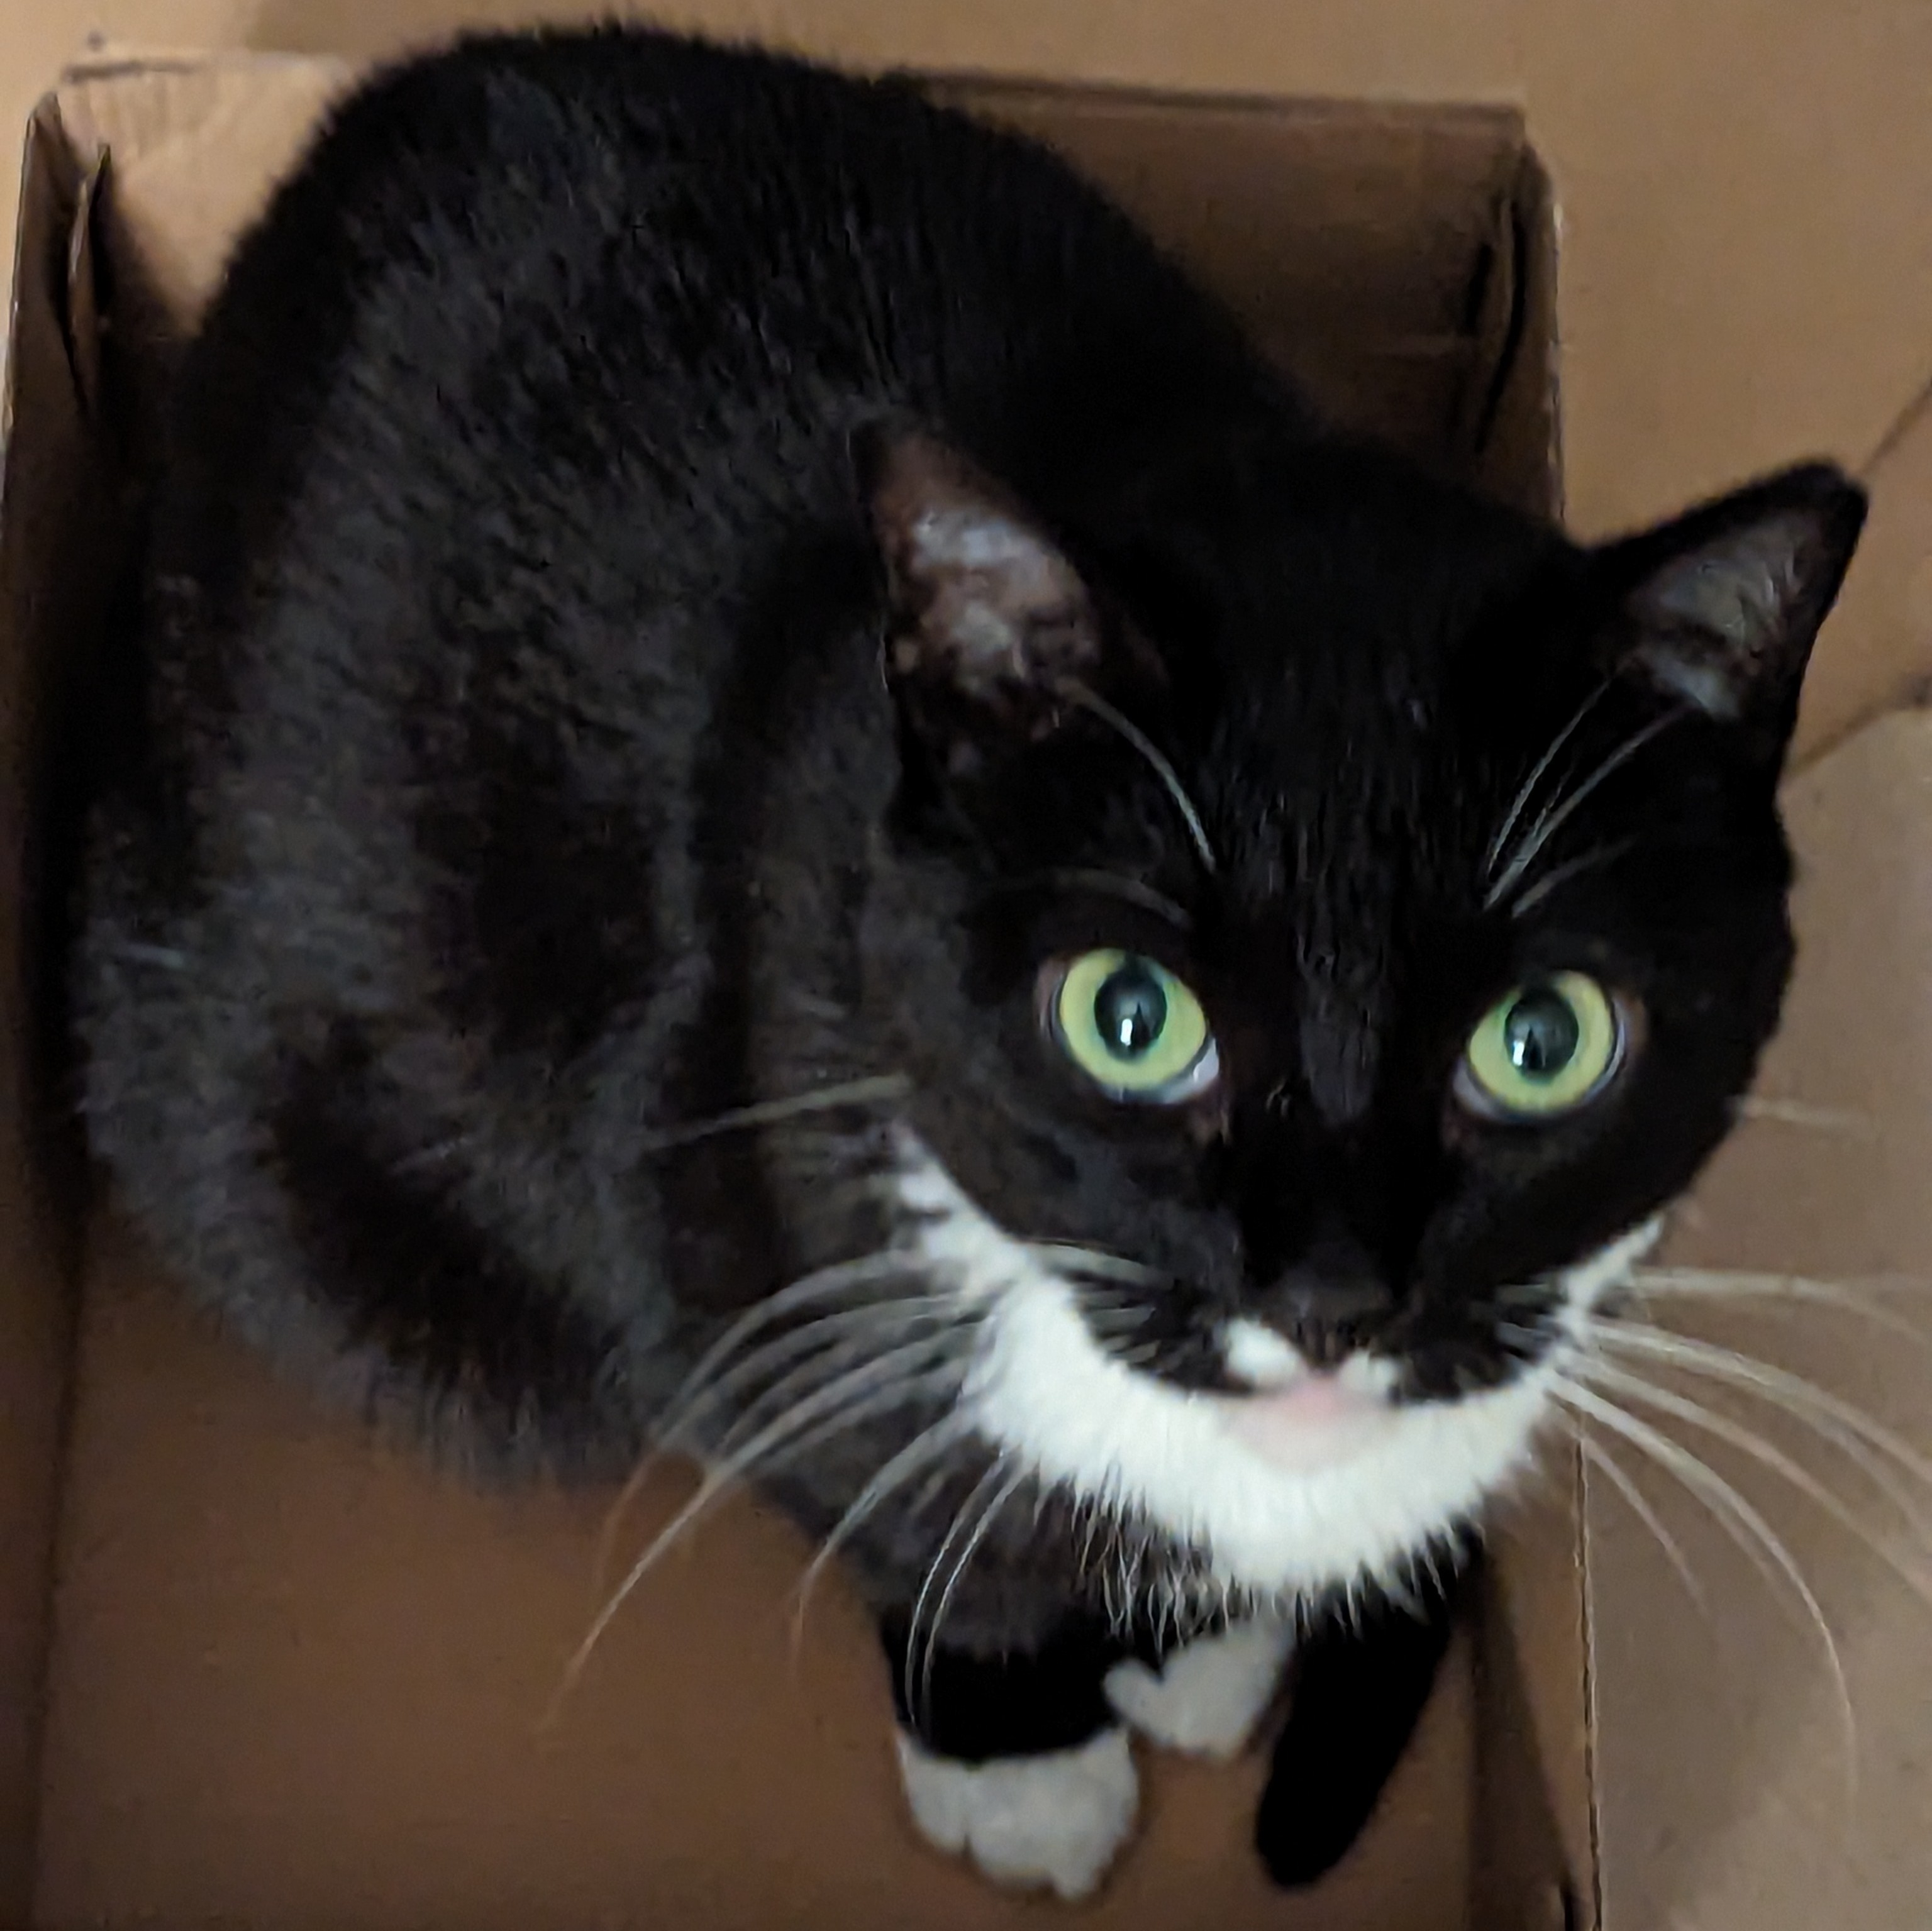 A black and white tuxedo cat sitting in a box, looking up at the camera